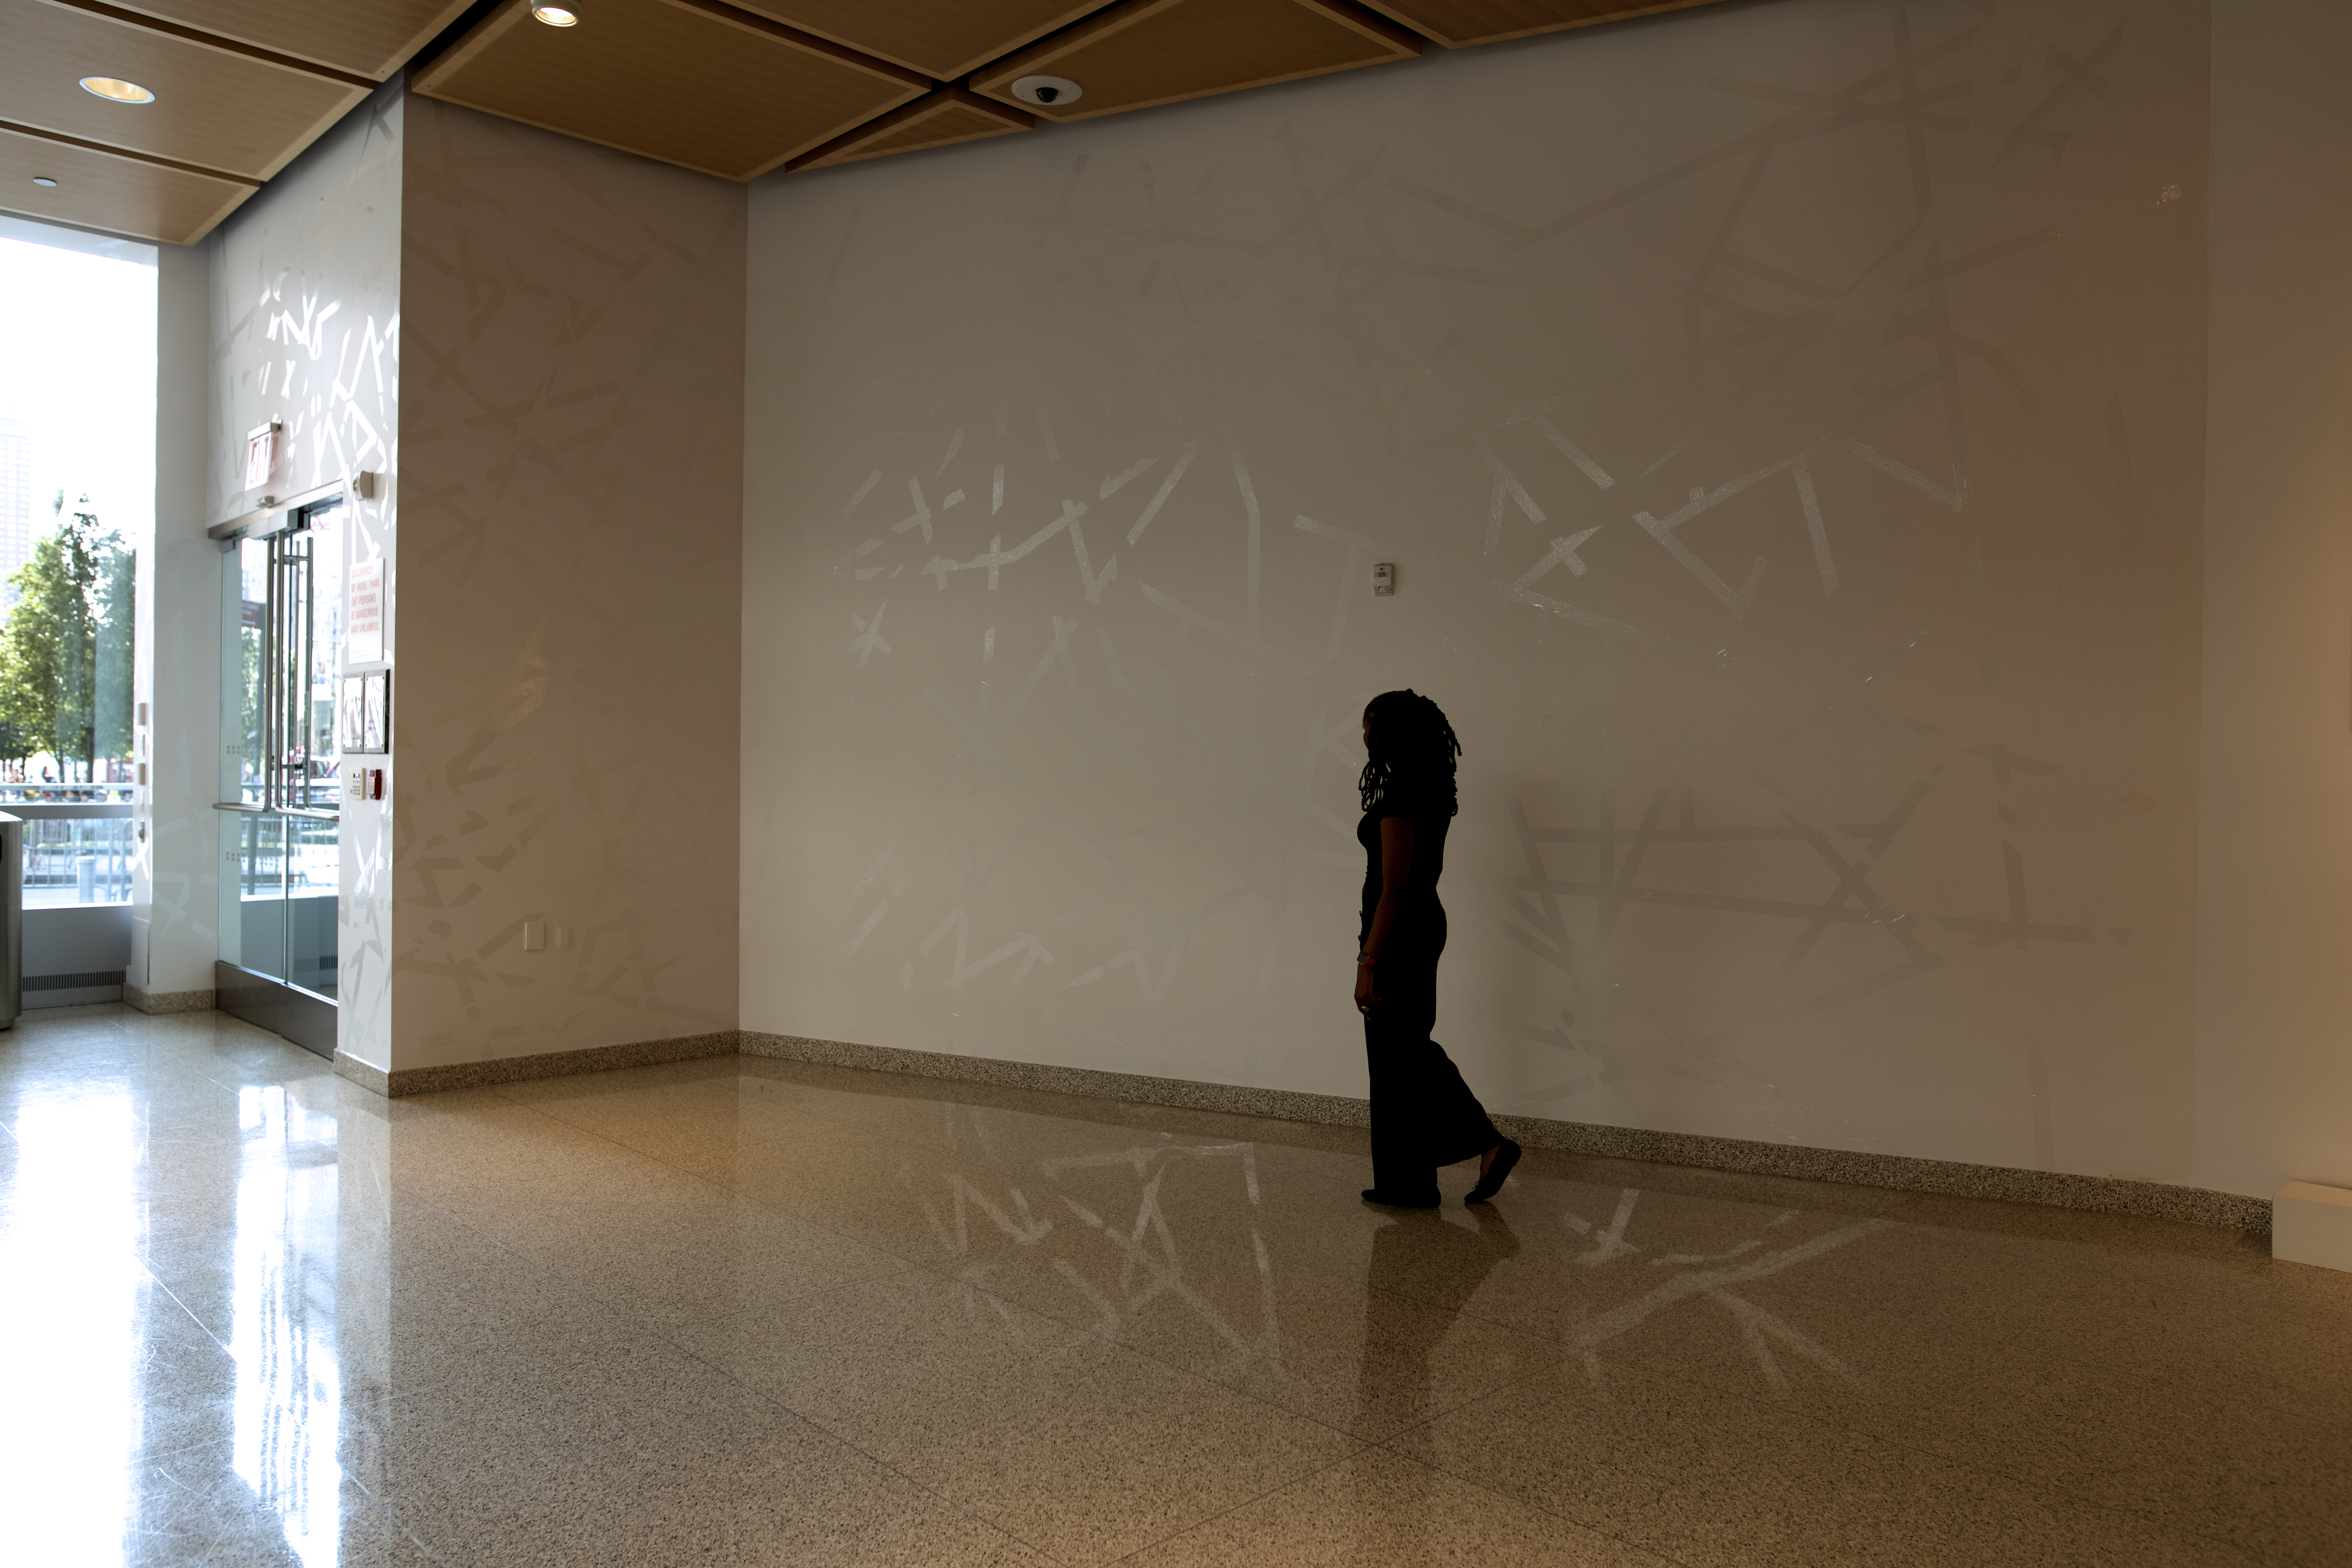 Packing Tape #2, Gesture, at BMCC Shirley Fiterman Gallery